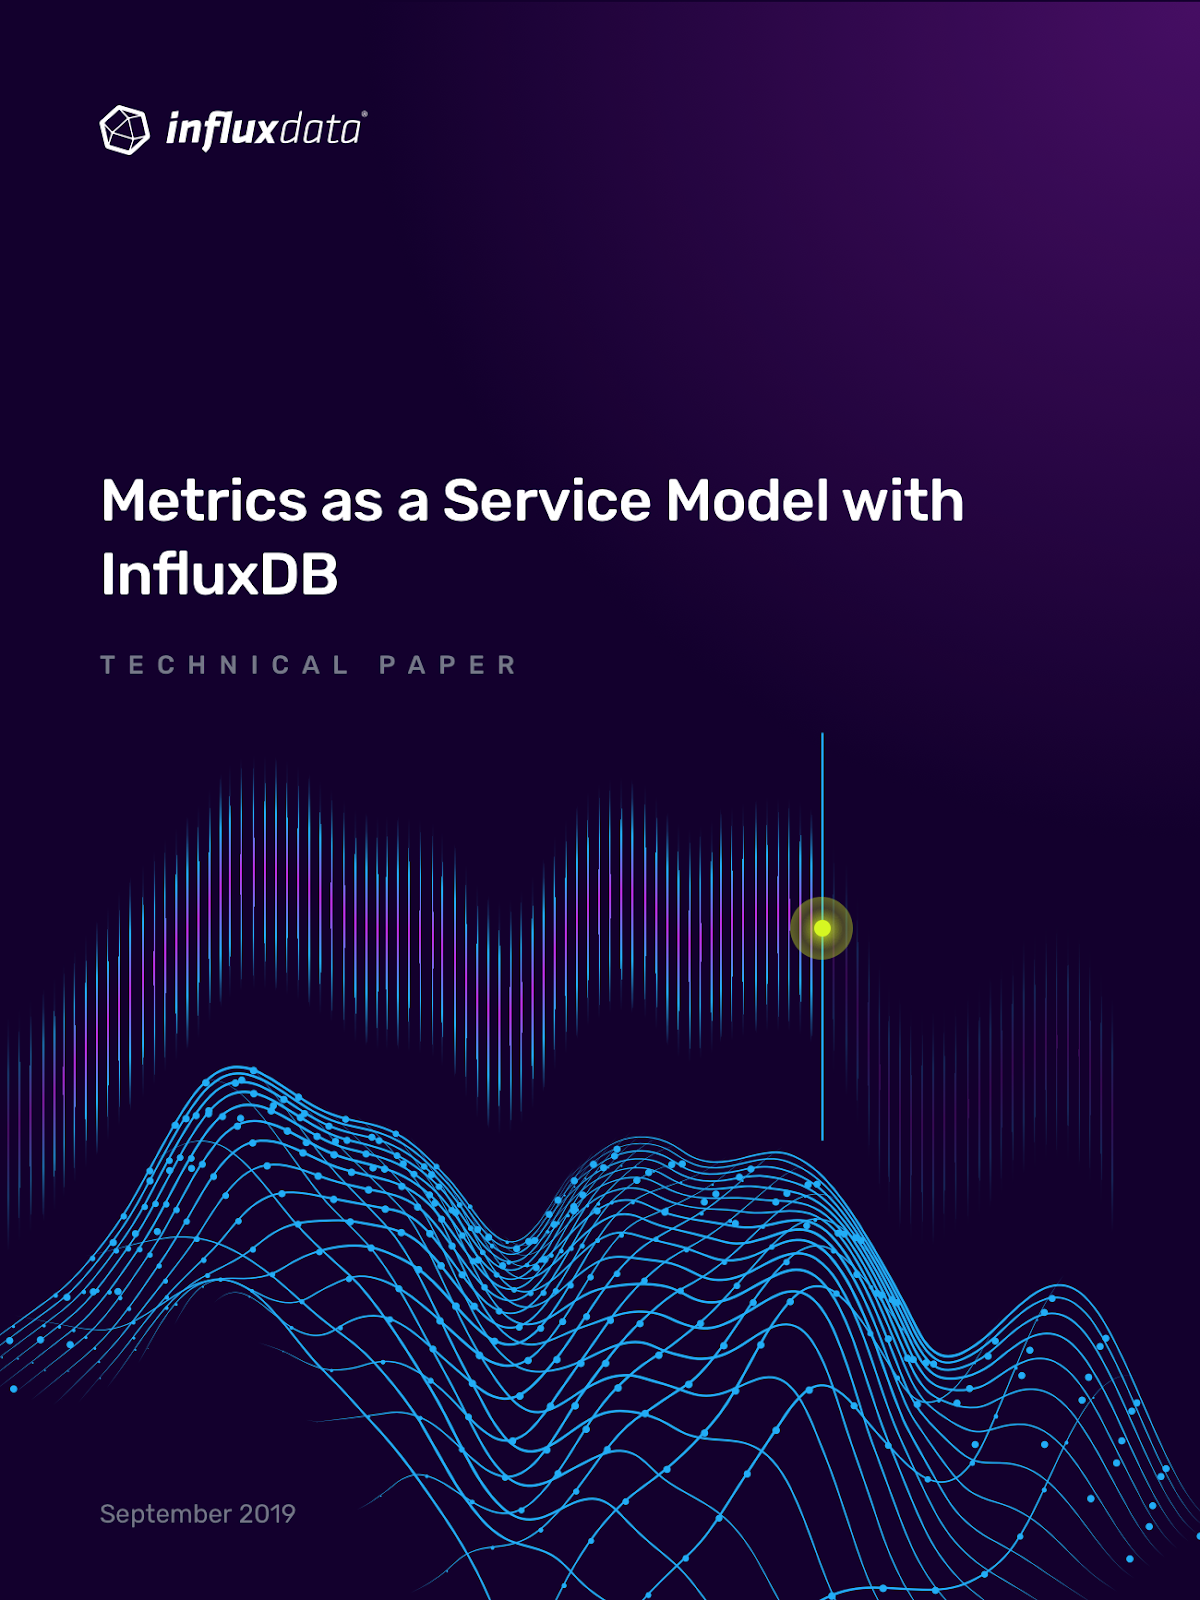 The Metrics as a Service (MaaS) Model with InfluxDB | InfluxData